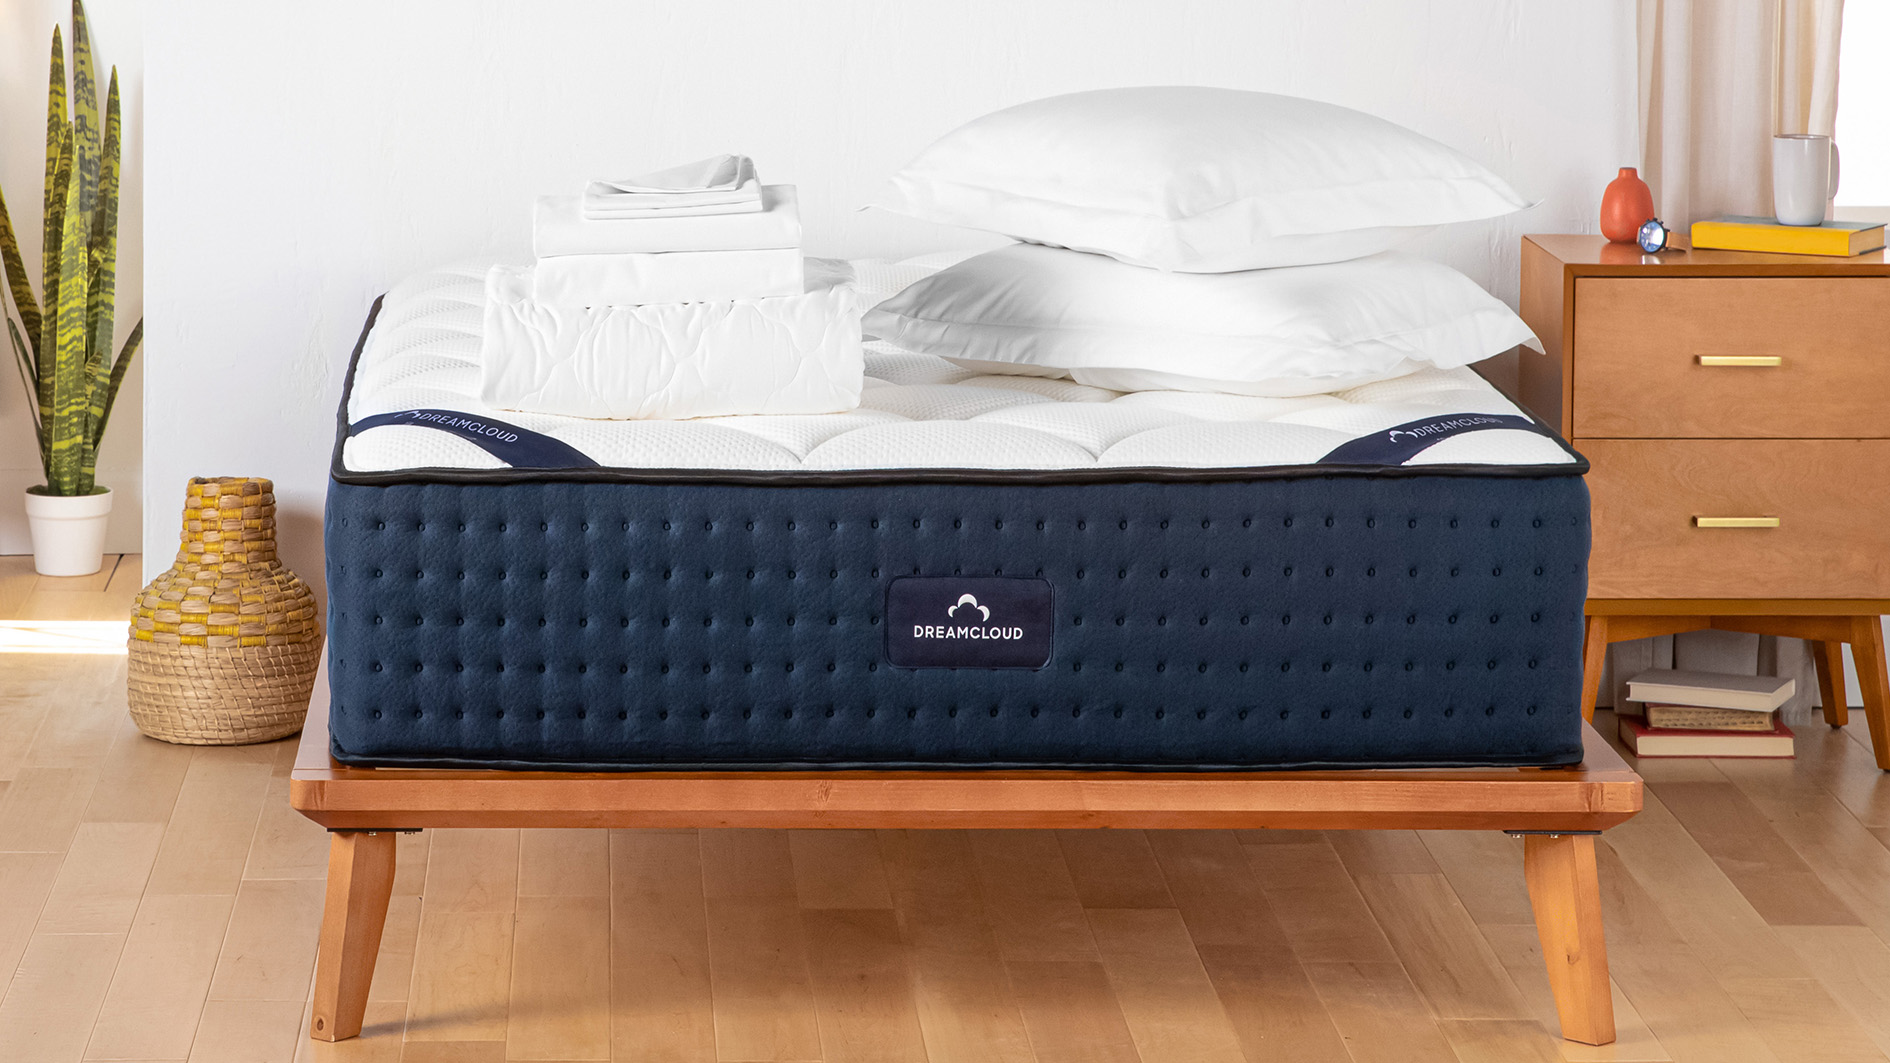 The DreamCloud Mattress, show here on a wooden bed frame in a white bedroom, is the best queen mattress for couples and restless sleepers